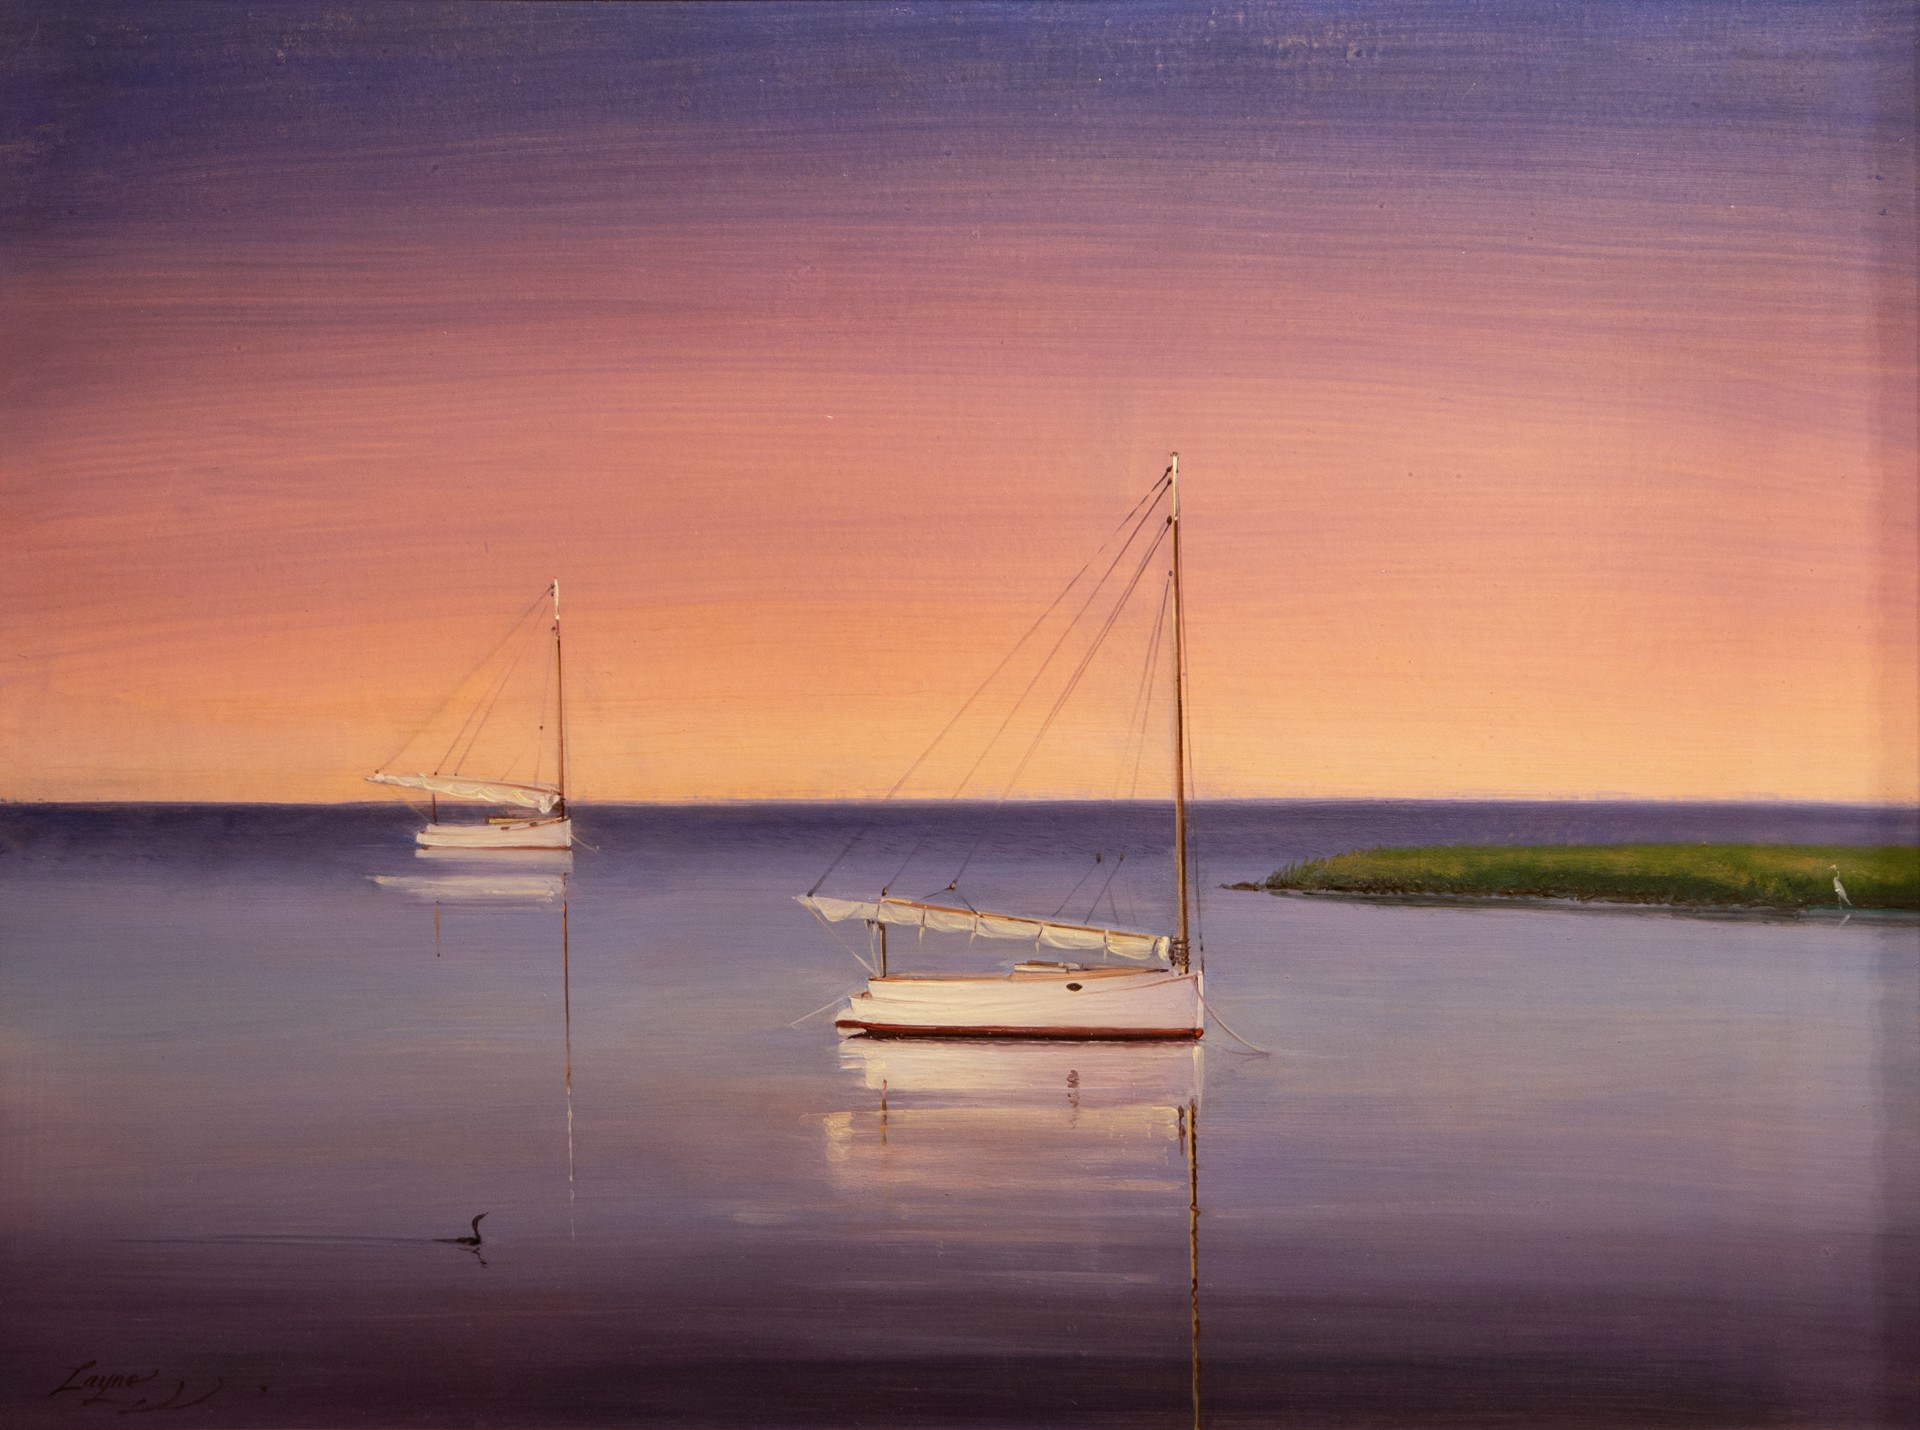 Evening Reflections by Peter Layne Arguimbau